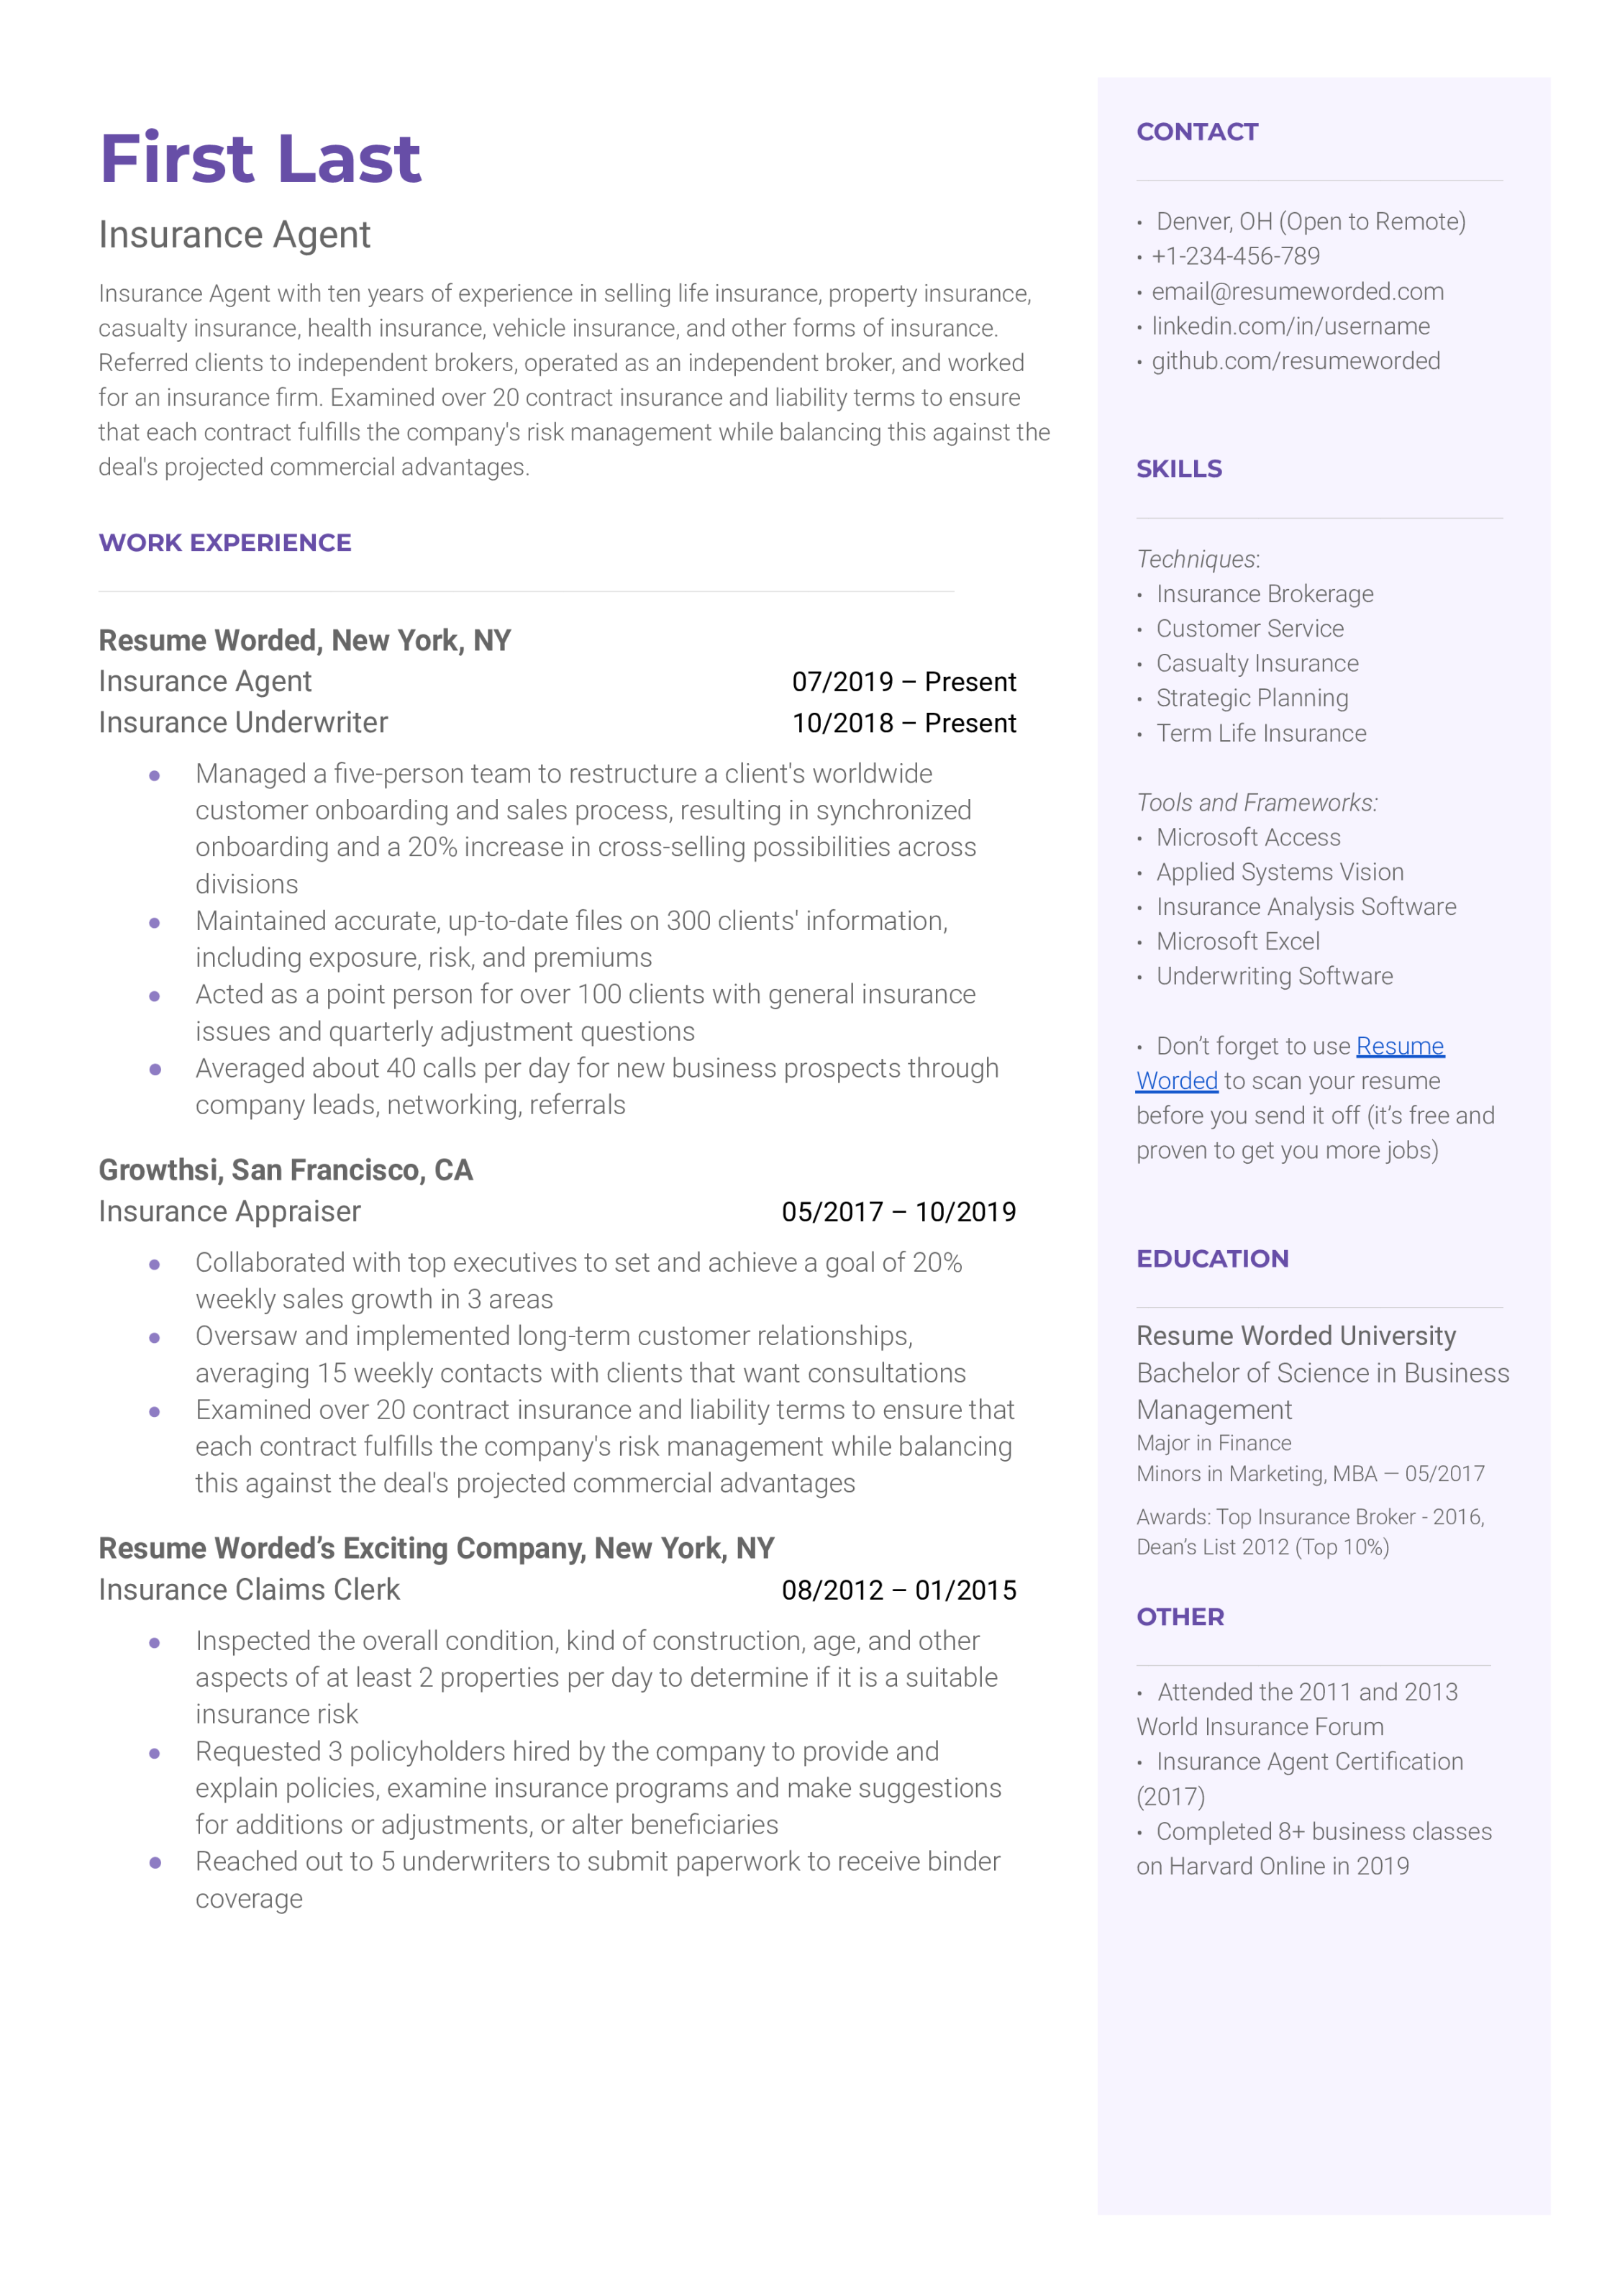 Insurance Resume Examples for   Resume Worded